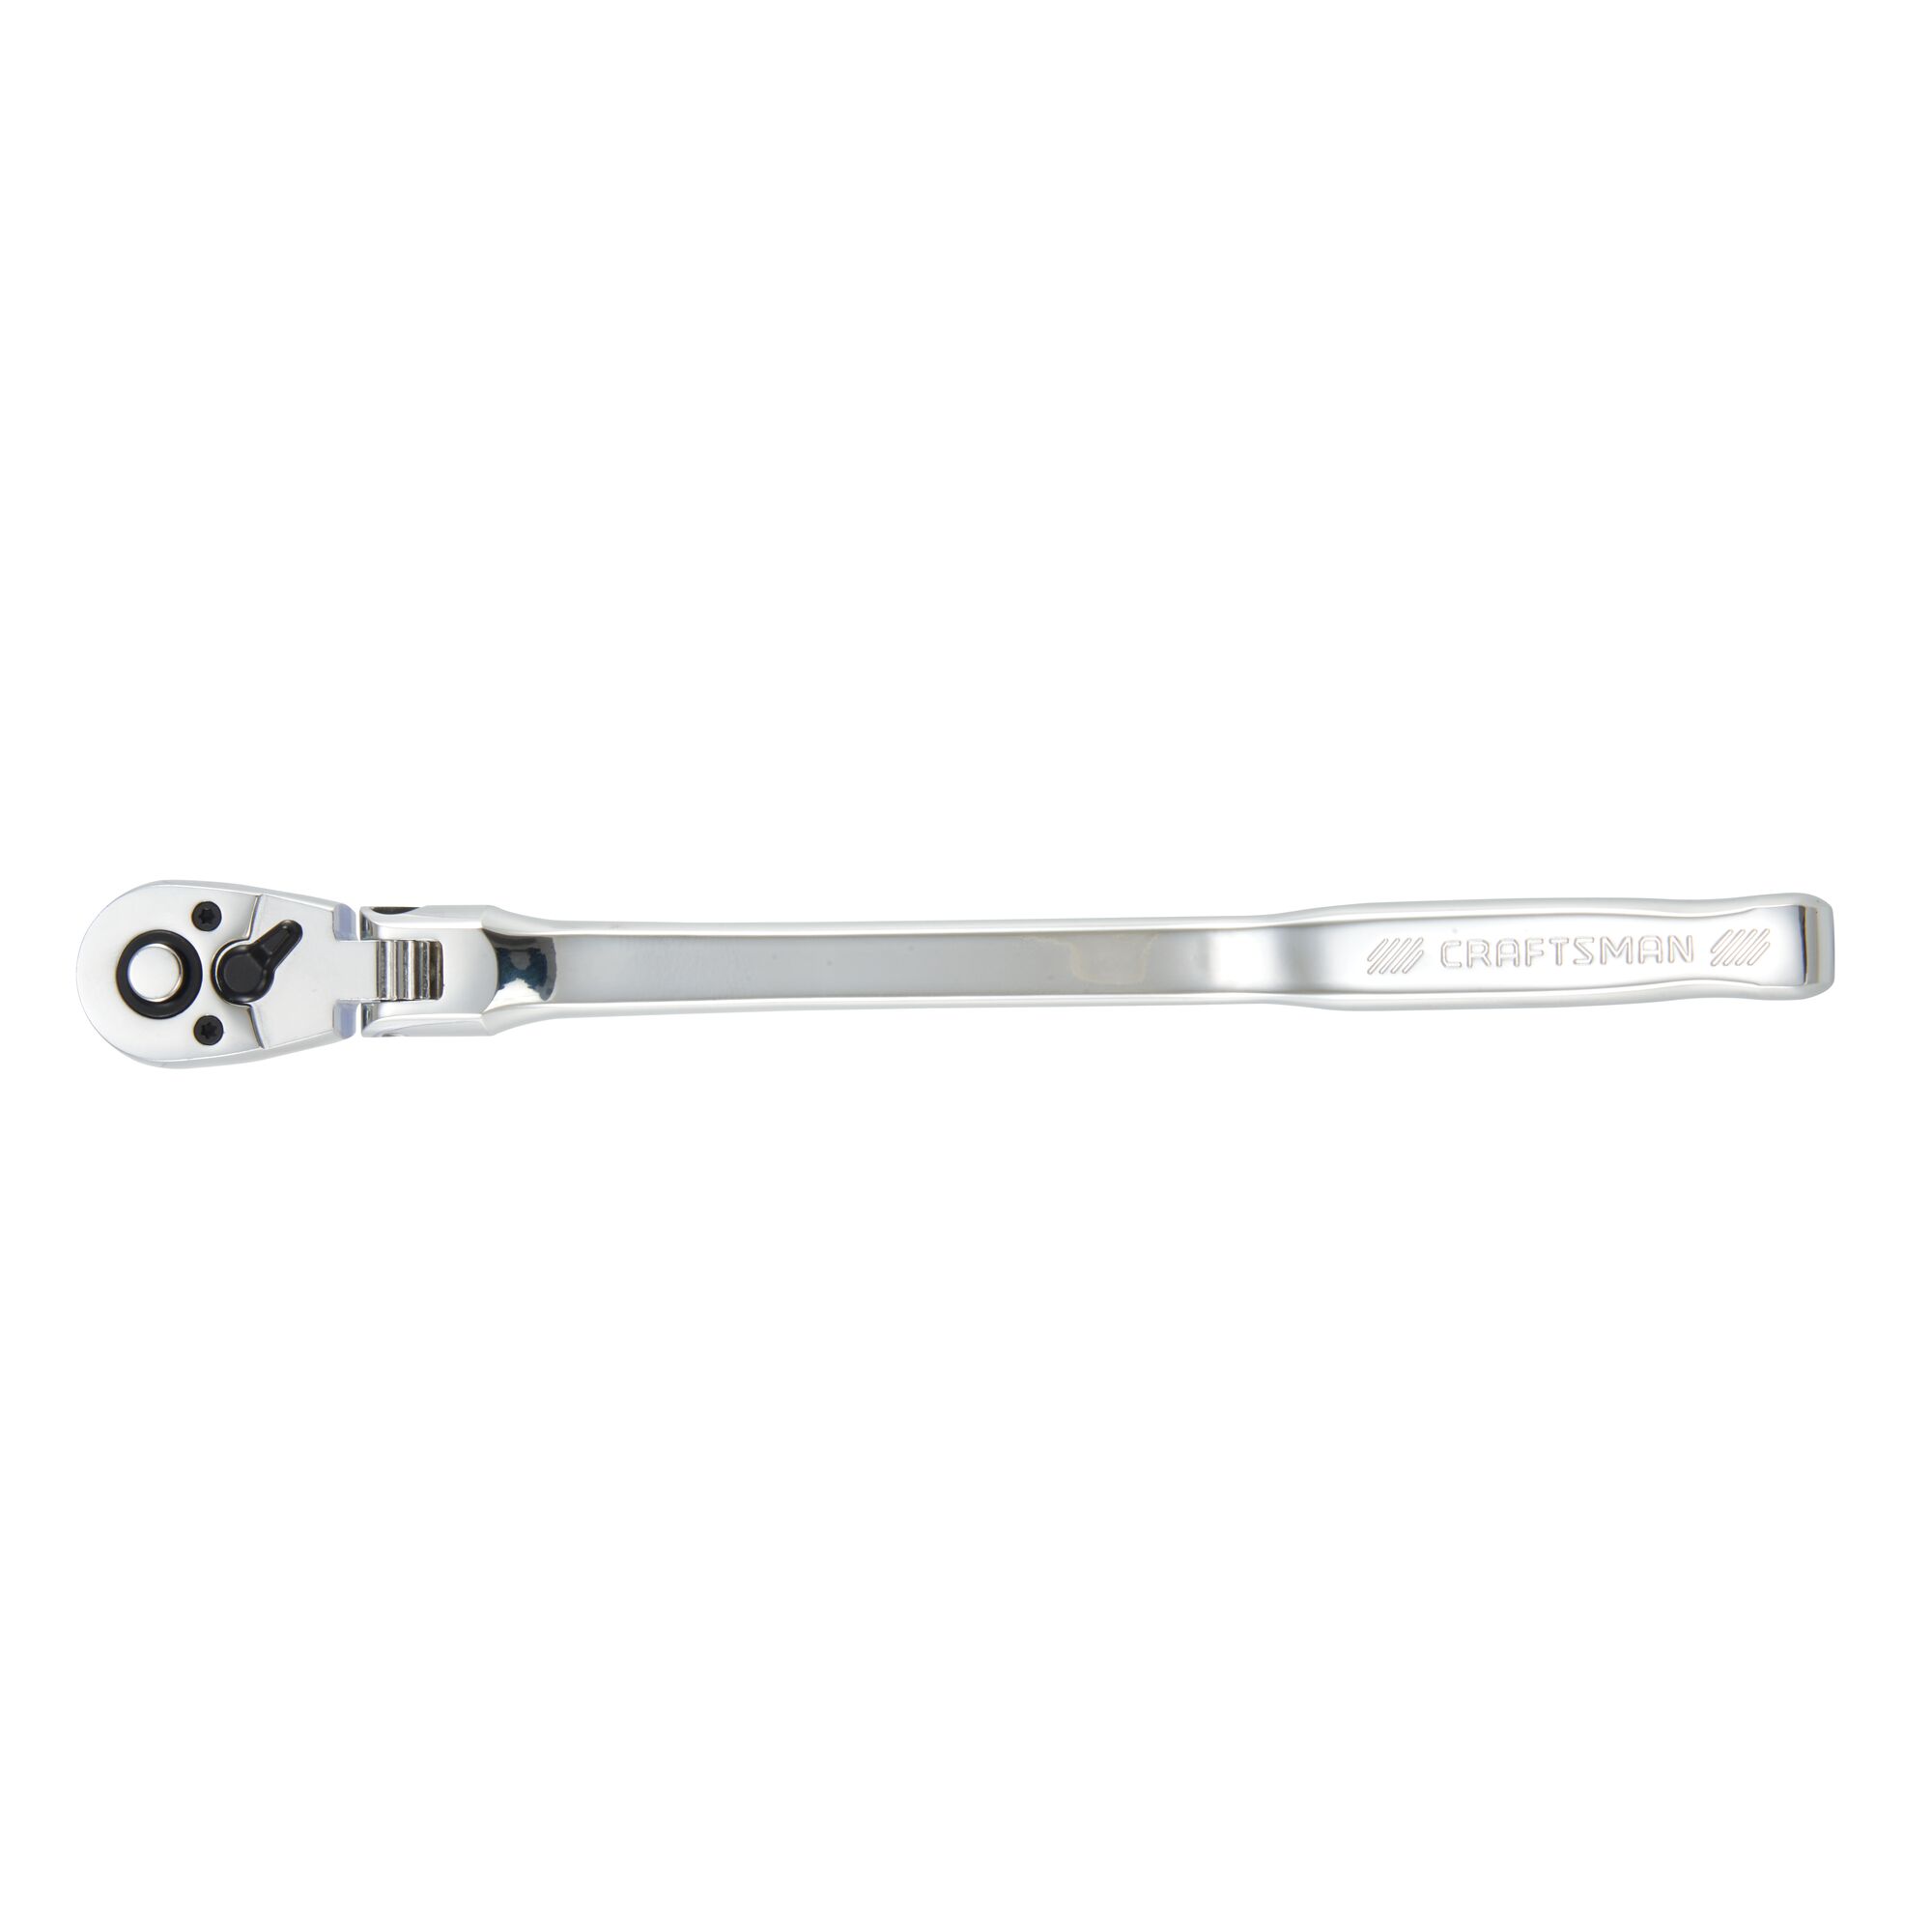 View of CRAFTSMAN Ratchets on white background